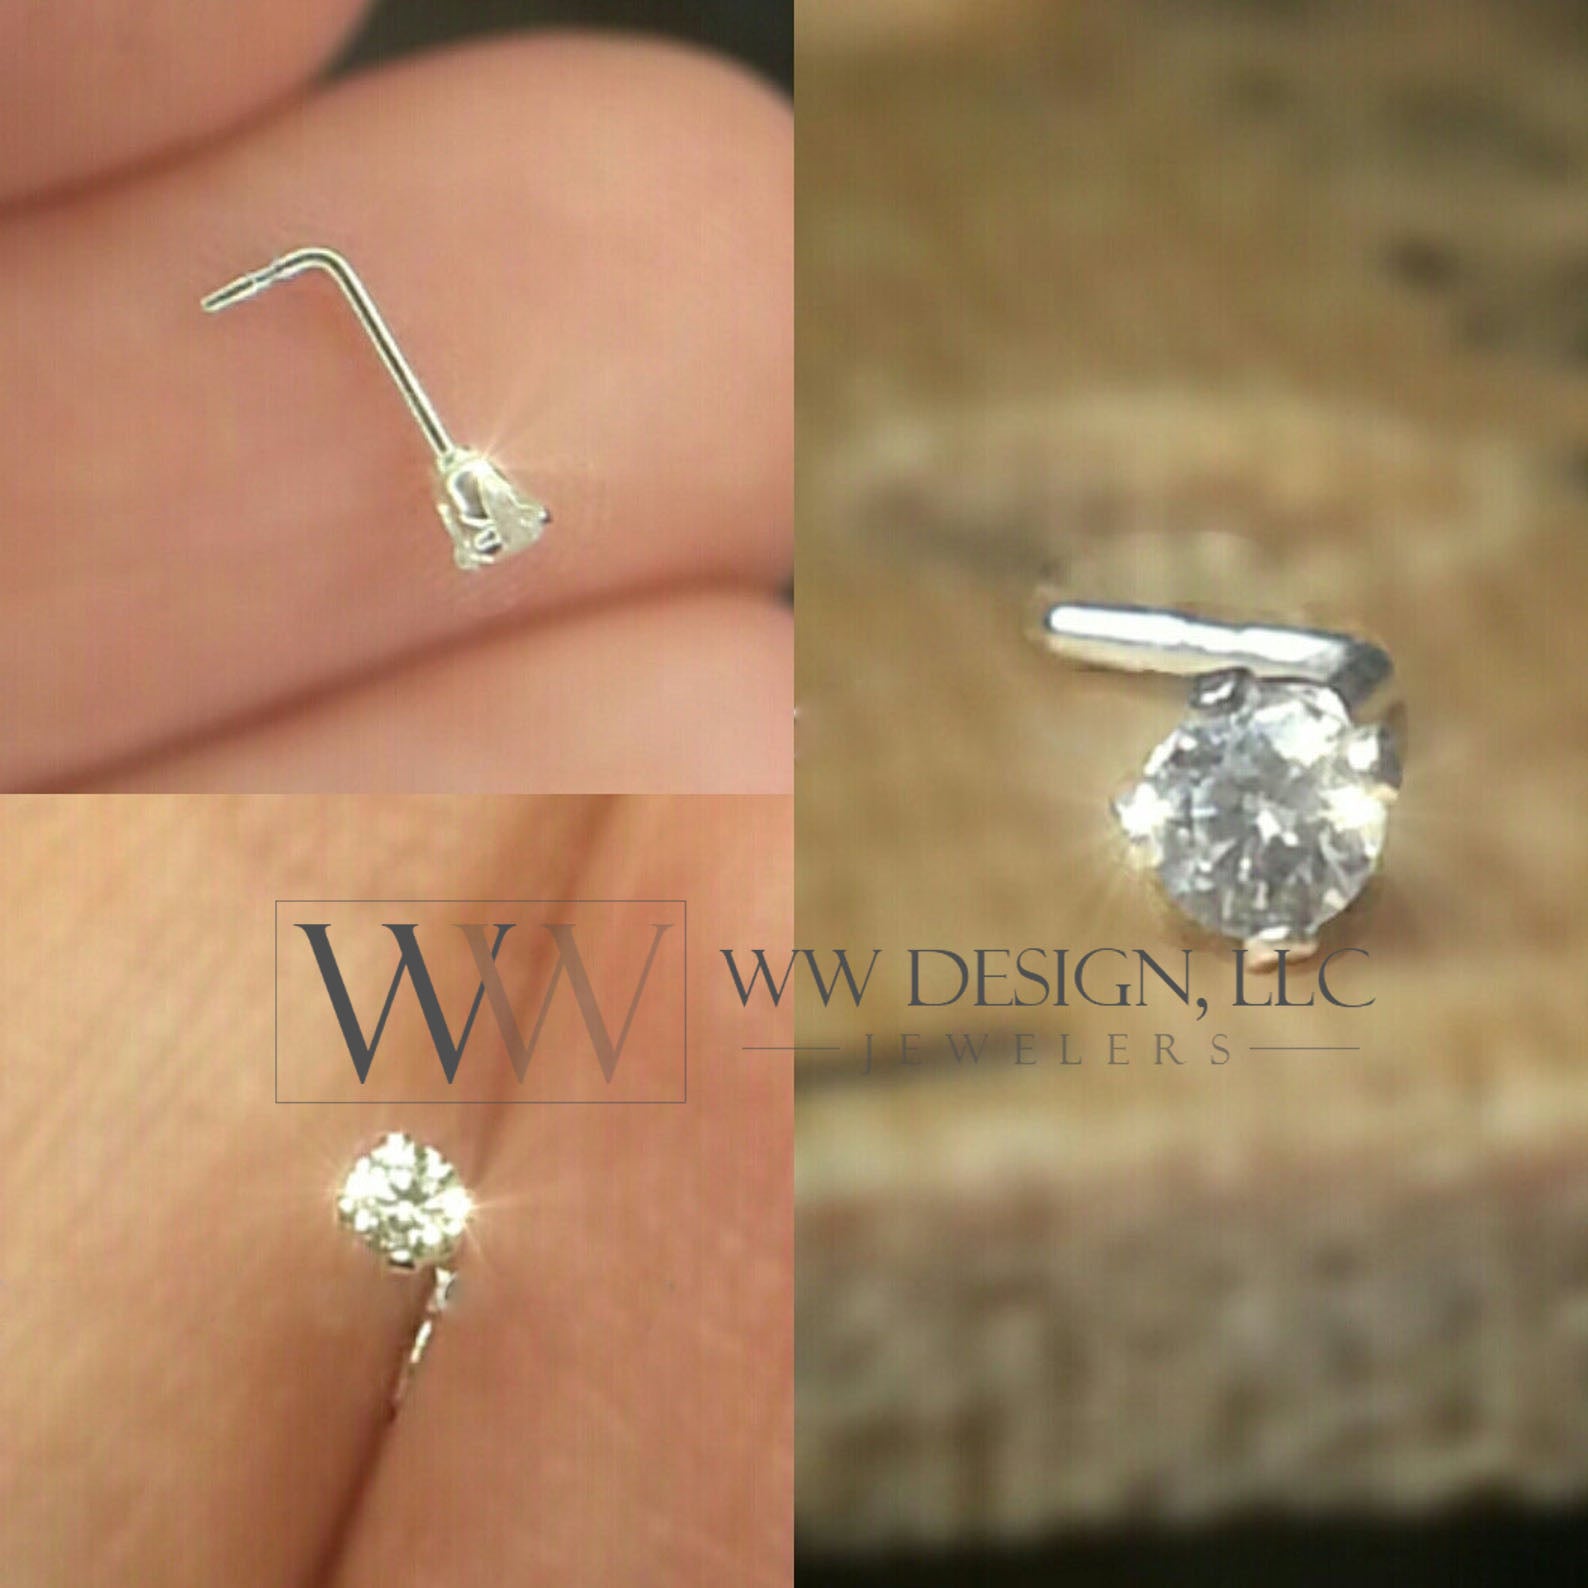 Nose Ring Stud Post w/ 2mm Swarovski Crystal - Sterling Silver or 14k Yellow/ White Gold Filled/ Solid L-Post White Clear Sparkly Crystal CZ